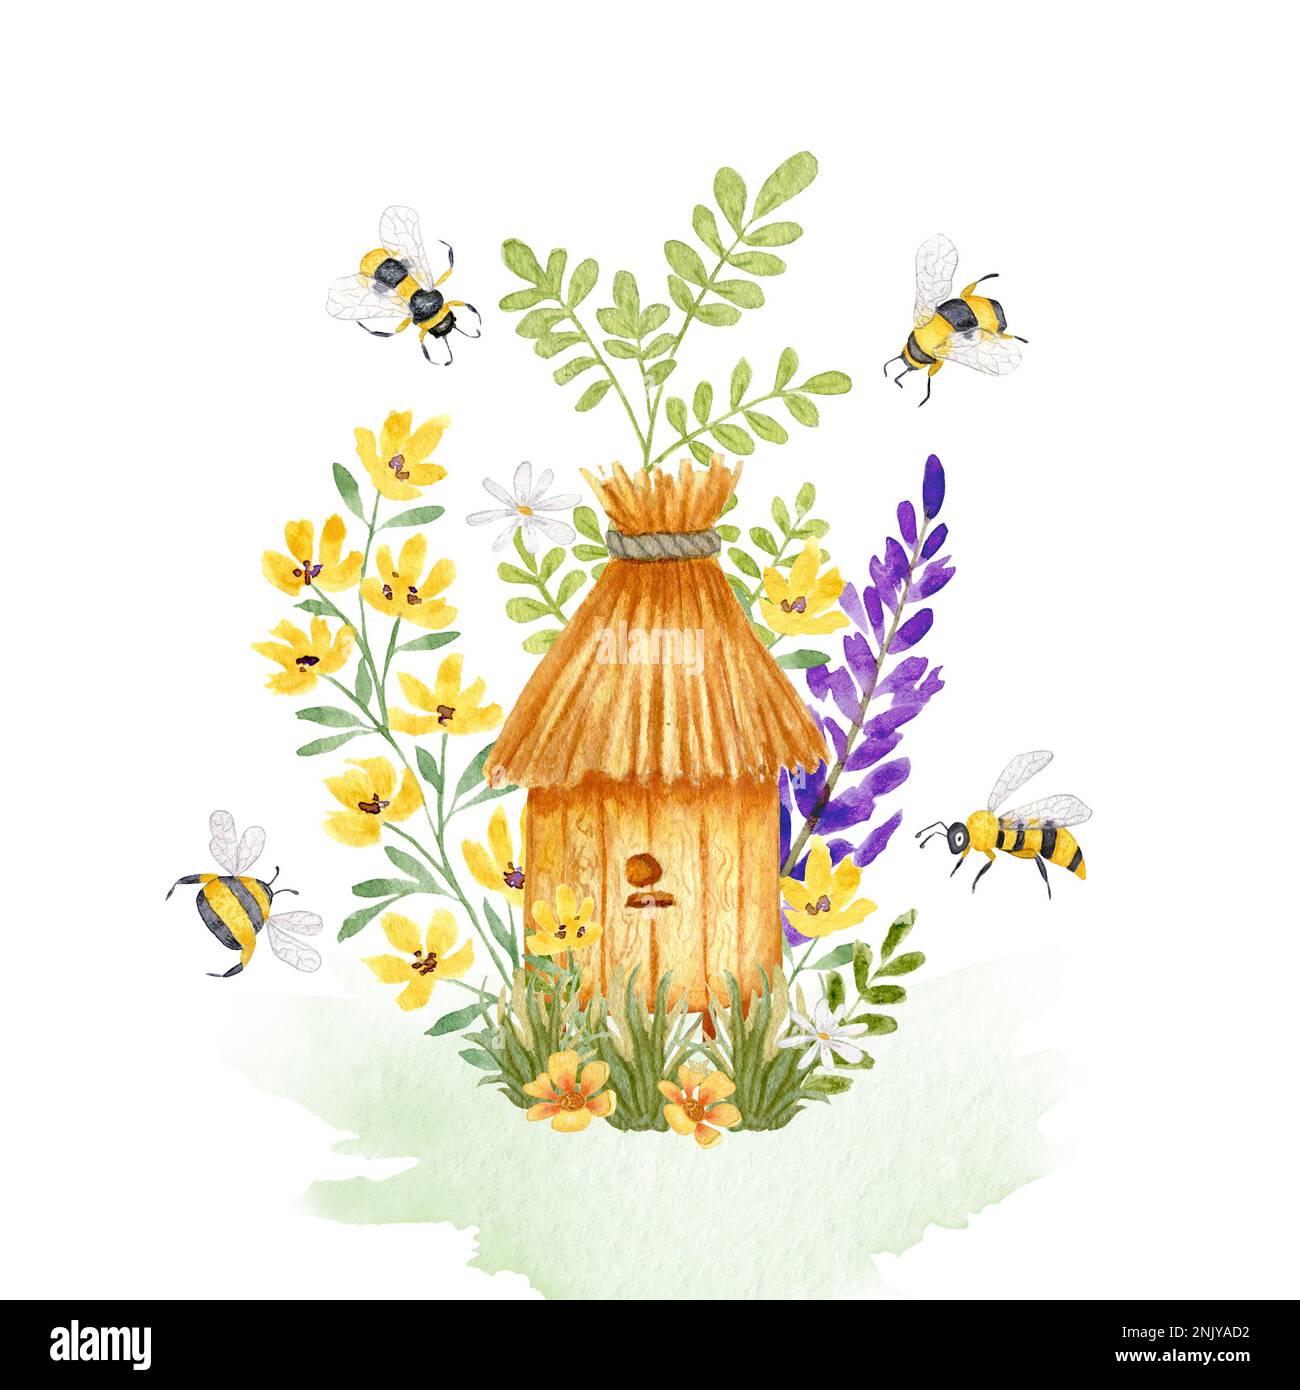 Watercolor illustration with Wooden beehive in lavender flowers. Bees, wild flowers and grass. Design for products with honey. Isolated on a white. Stock Photo